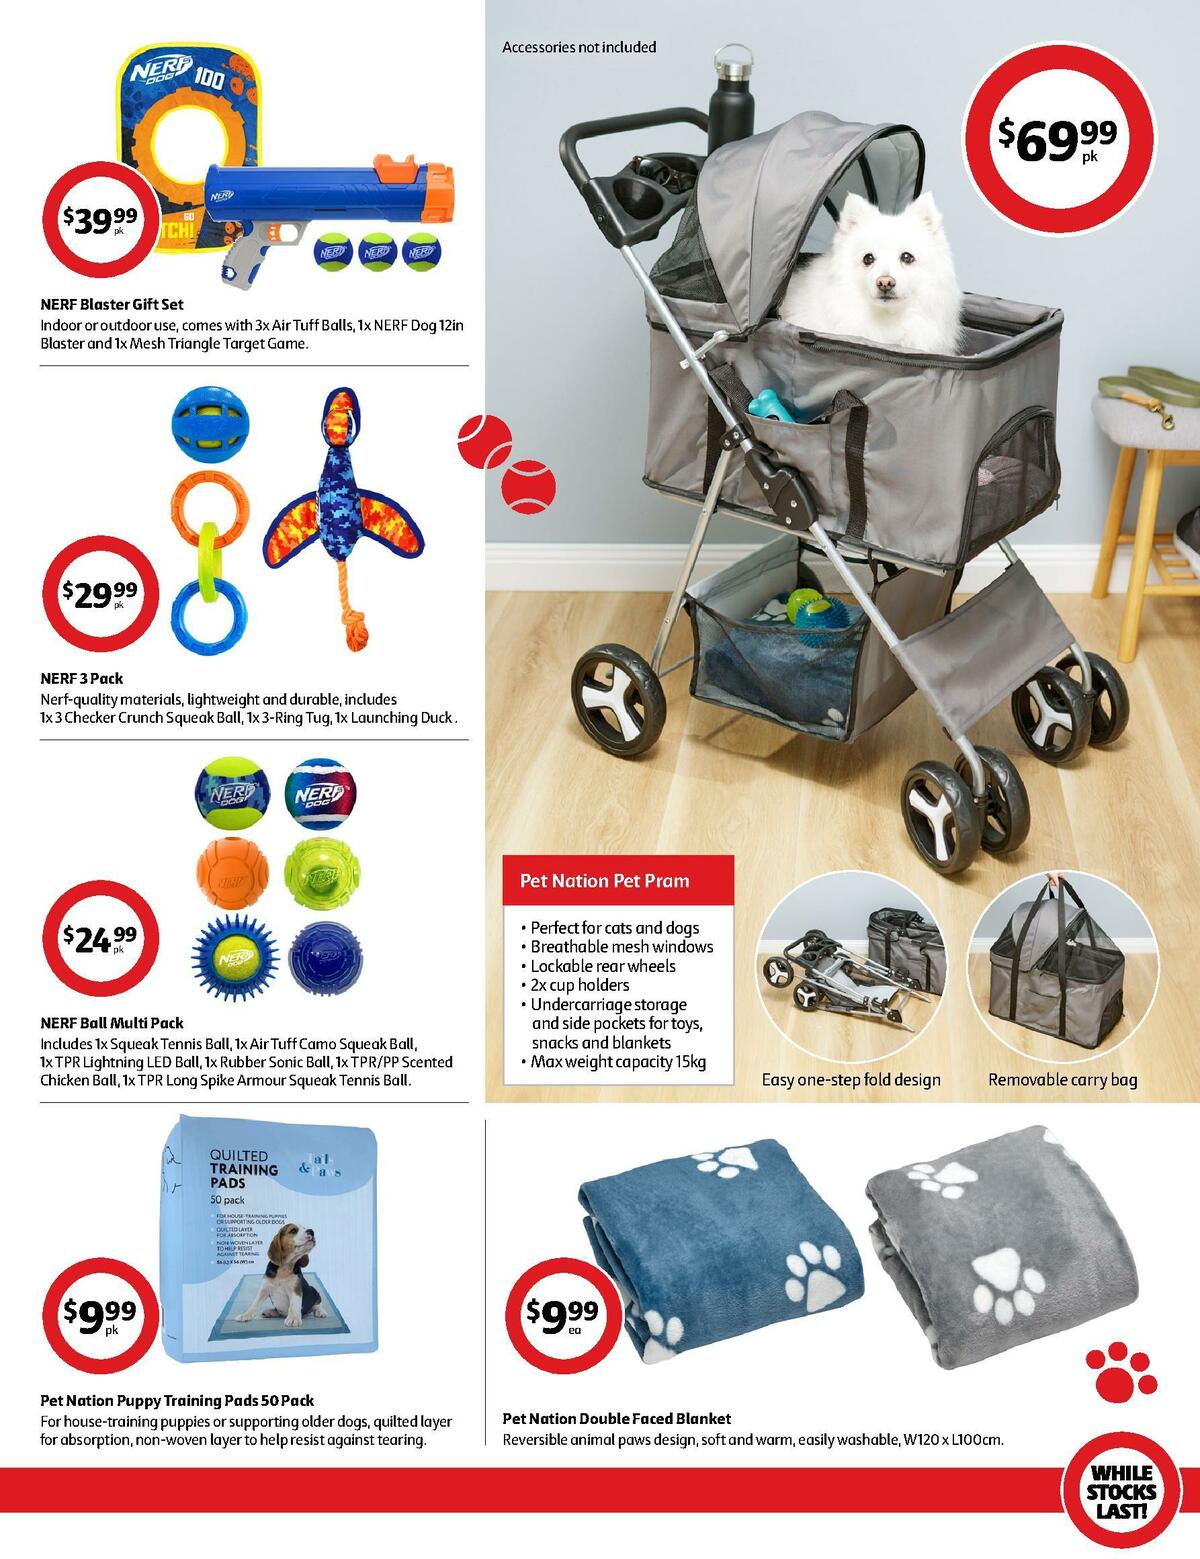 Coles Best Buys - Pampered Pets Catalogues from 7 October